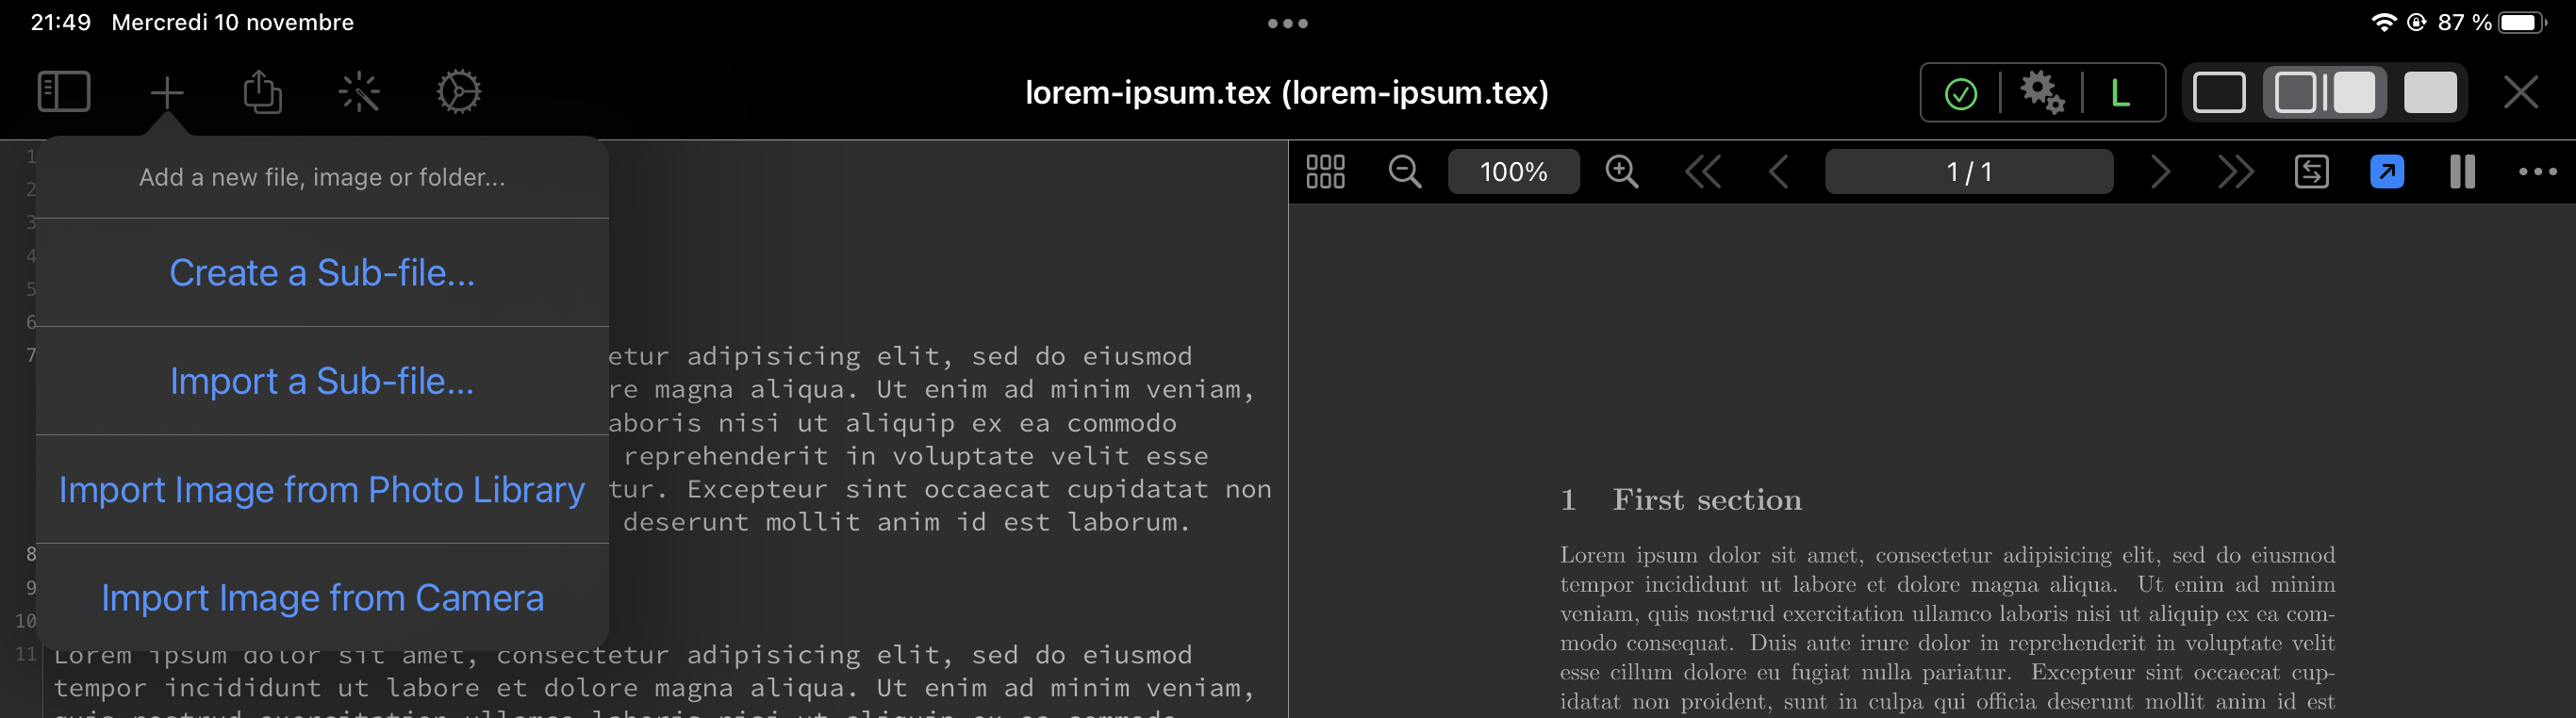 docs/apps/typesetting/examples/creating-images/workspace-add-menu_ios_ipad_dark-mode.png